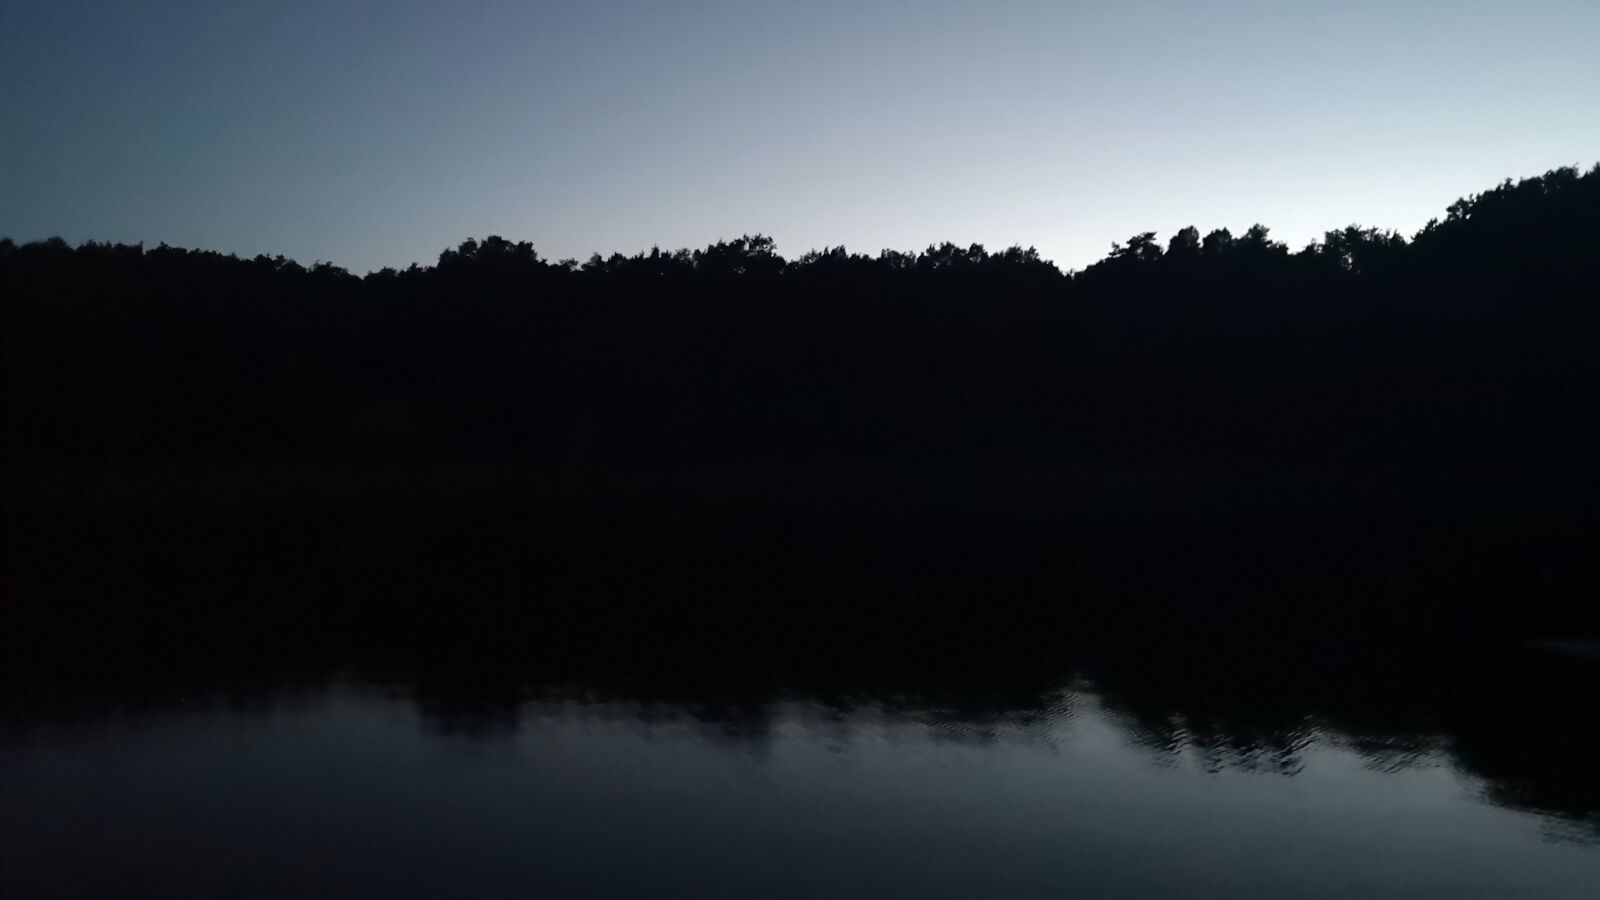 HUAWEI P20 sample photo. Lake, evening, forest photography